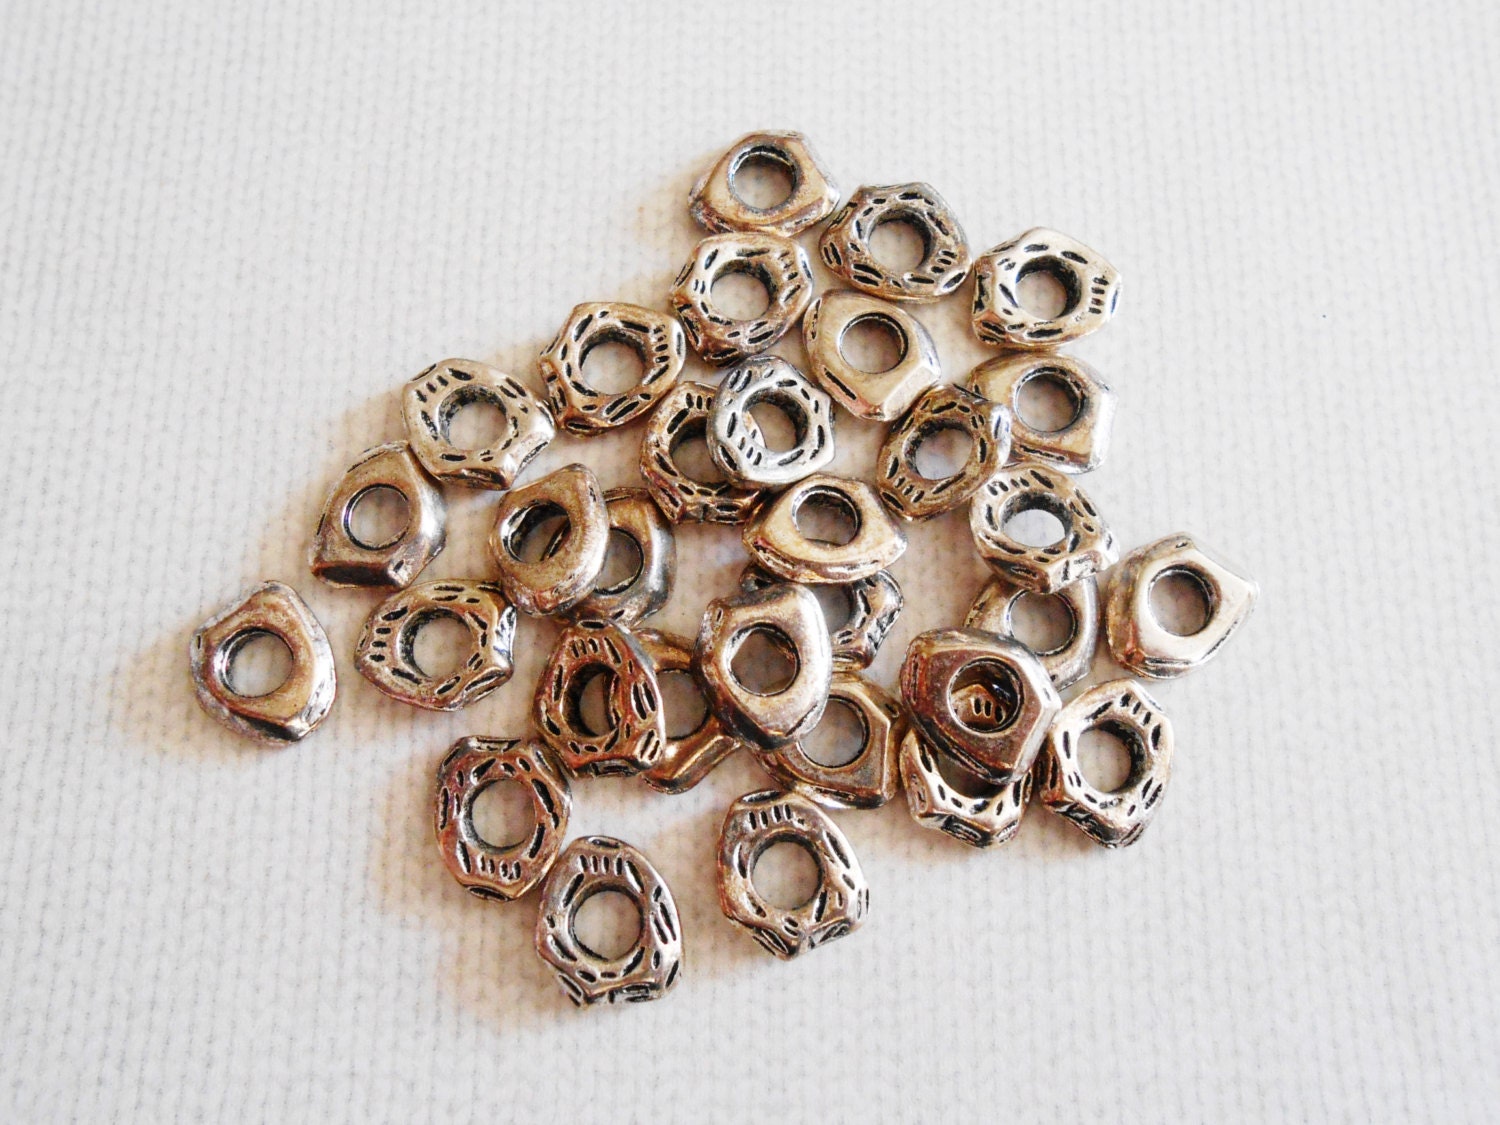 20 connector links. Silver ring connectors. Irregular jewelry